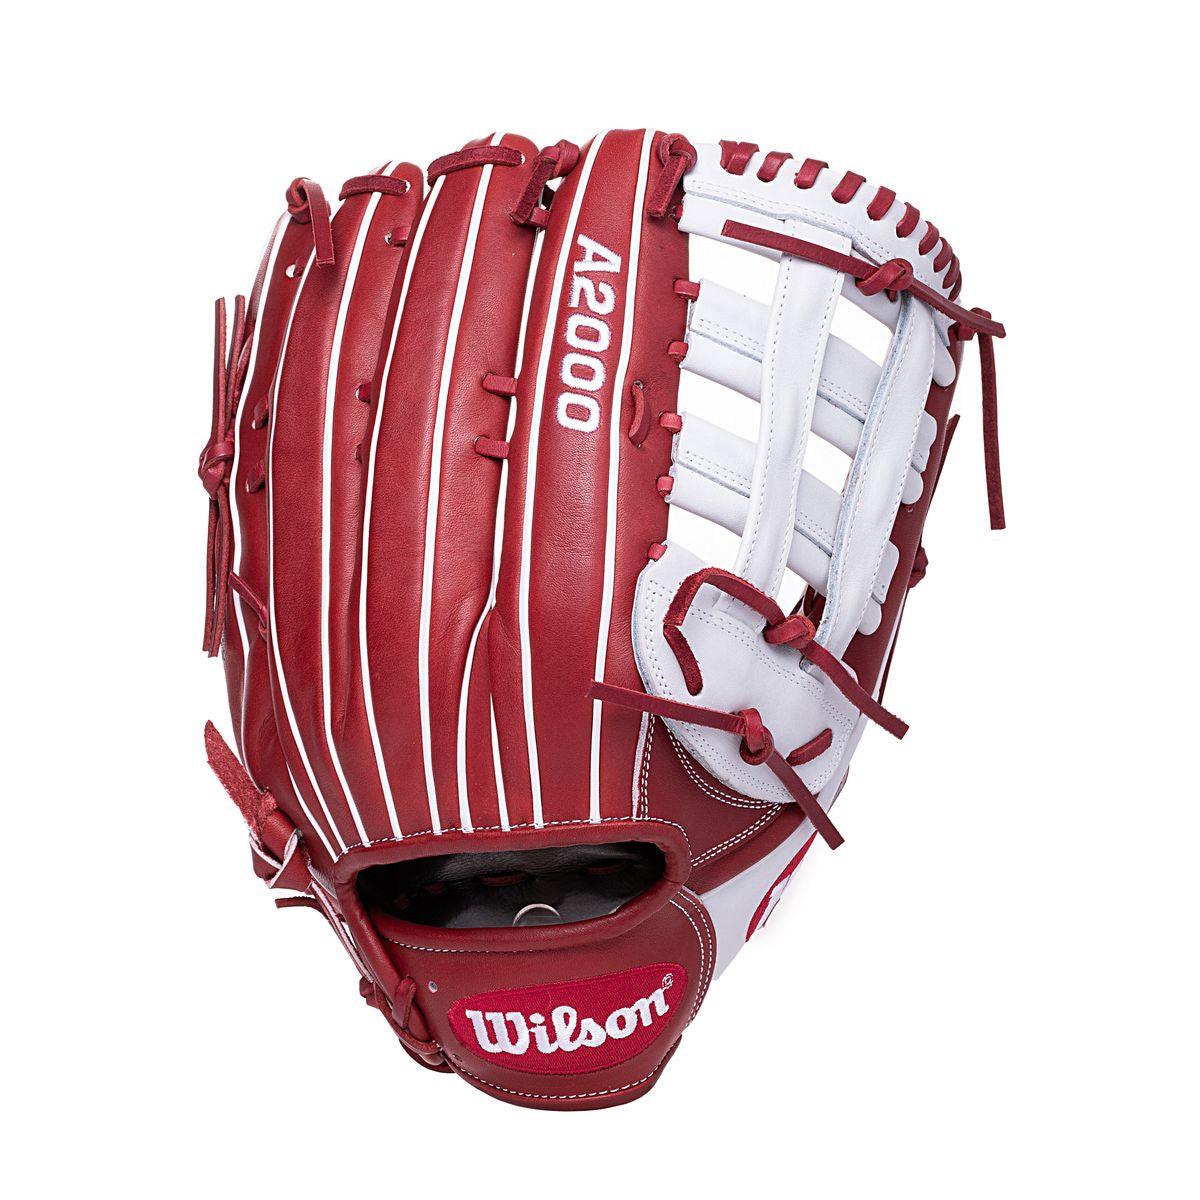 A2000 13.5" Senior Slowpitch Glove - Sports Excellence